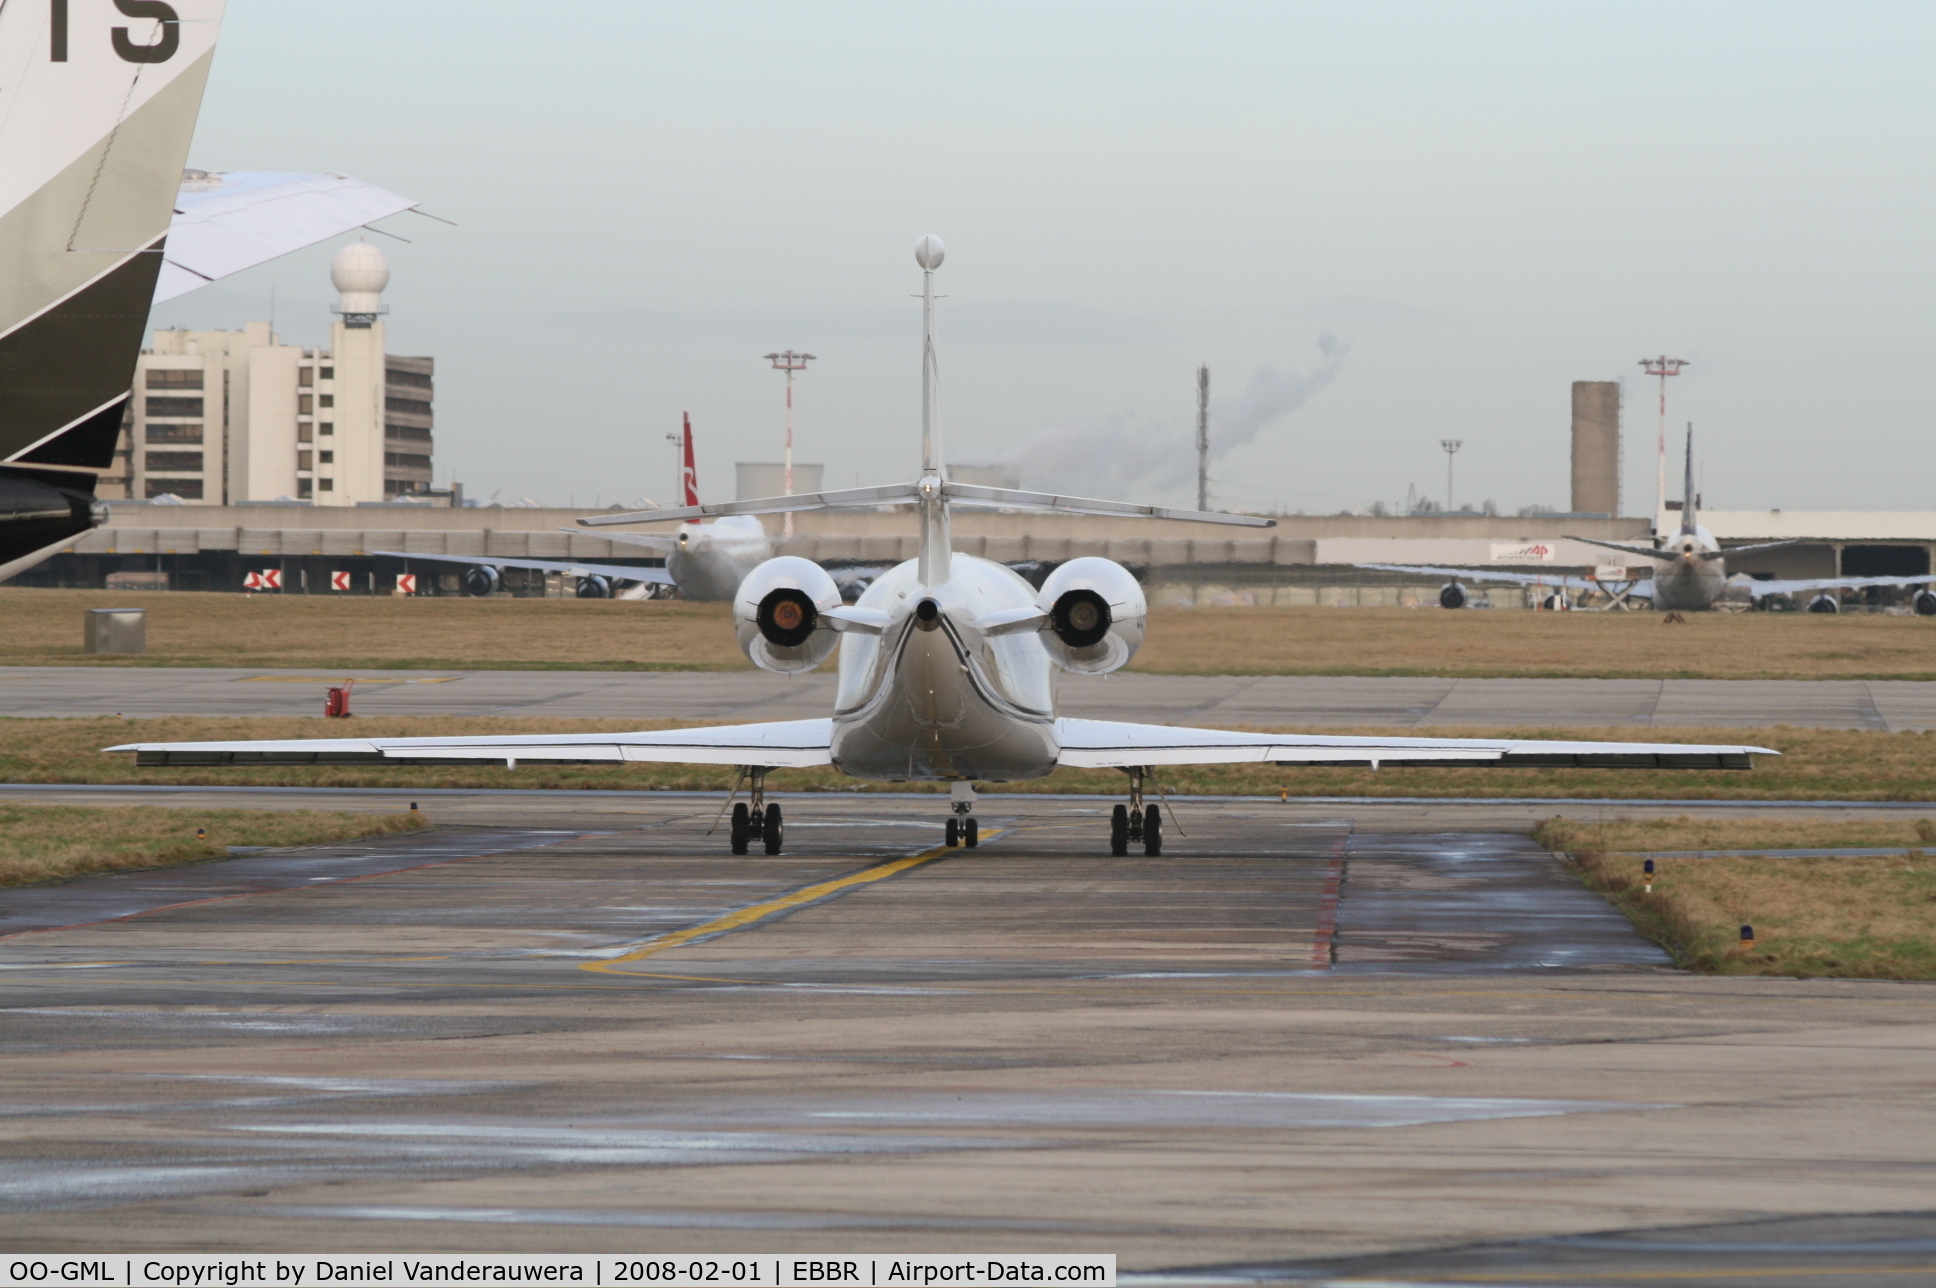 OO-GML, 2005 Dassault Falcon 2000EX C/N 75, manoeuvring to leave G.A. apron